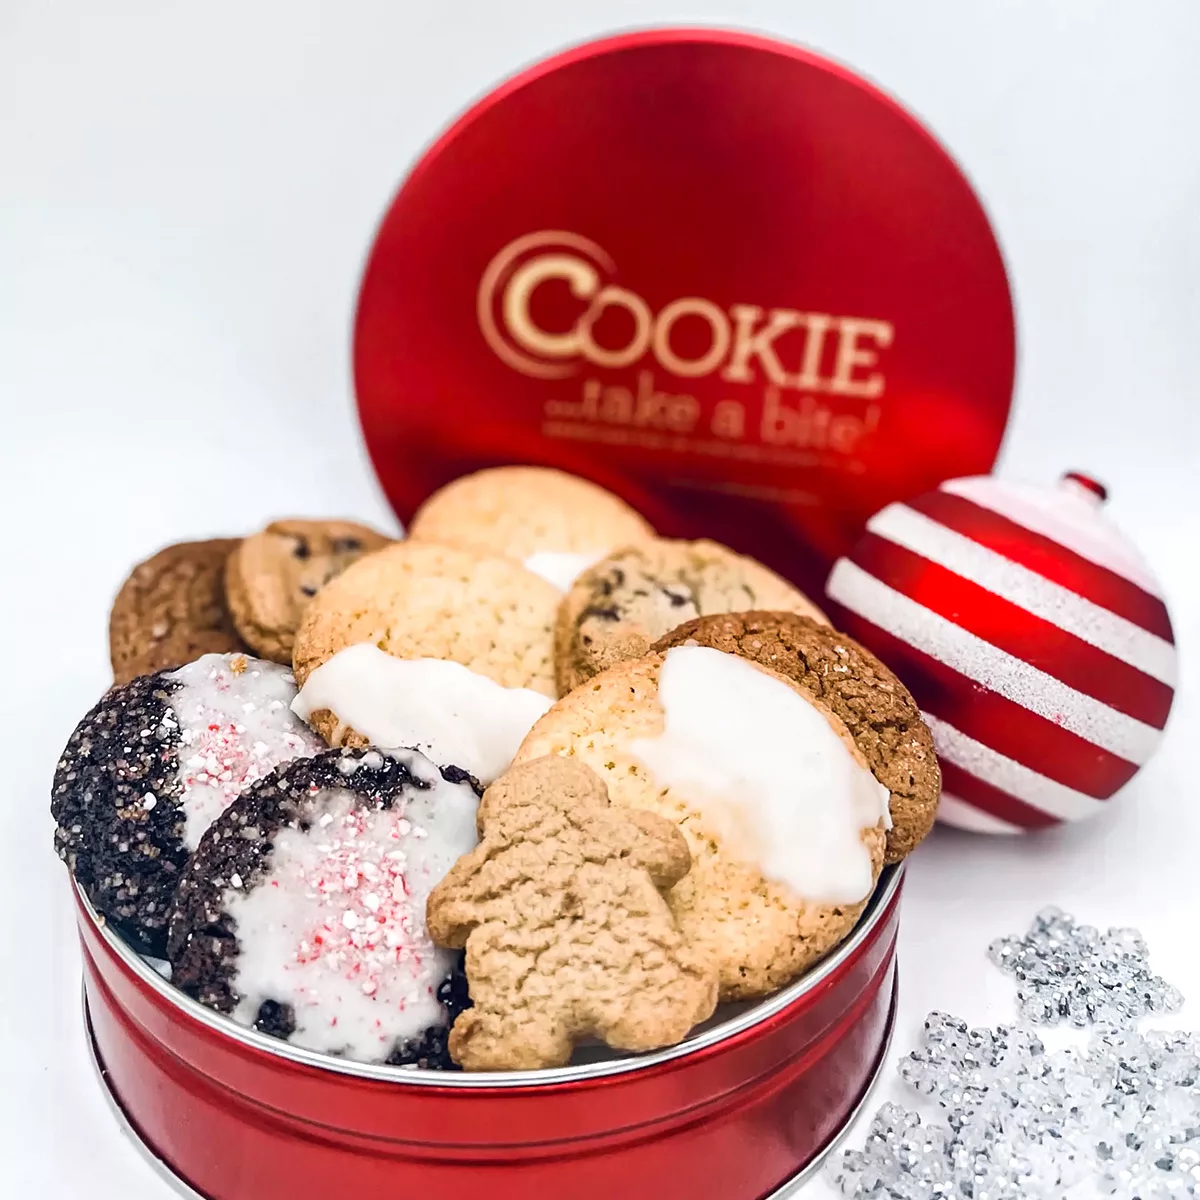 A platinum cookie gift tin, with over 42 all natural cookies in seasonal holiday flavors.